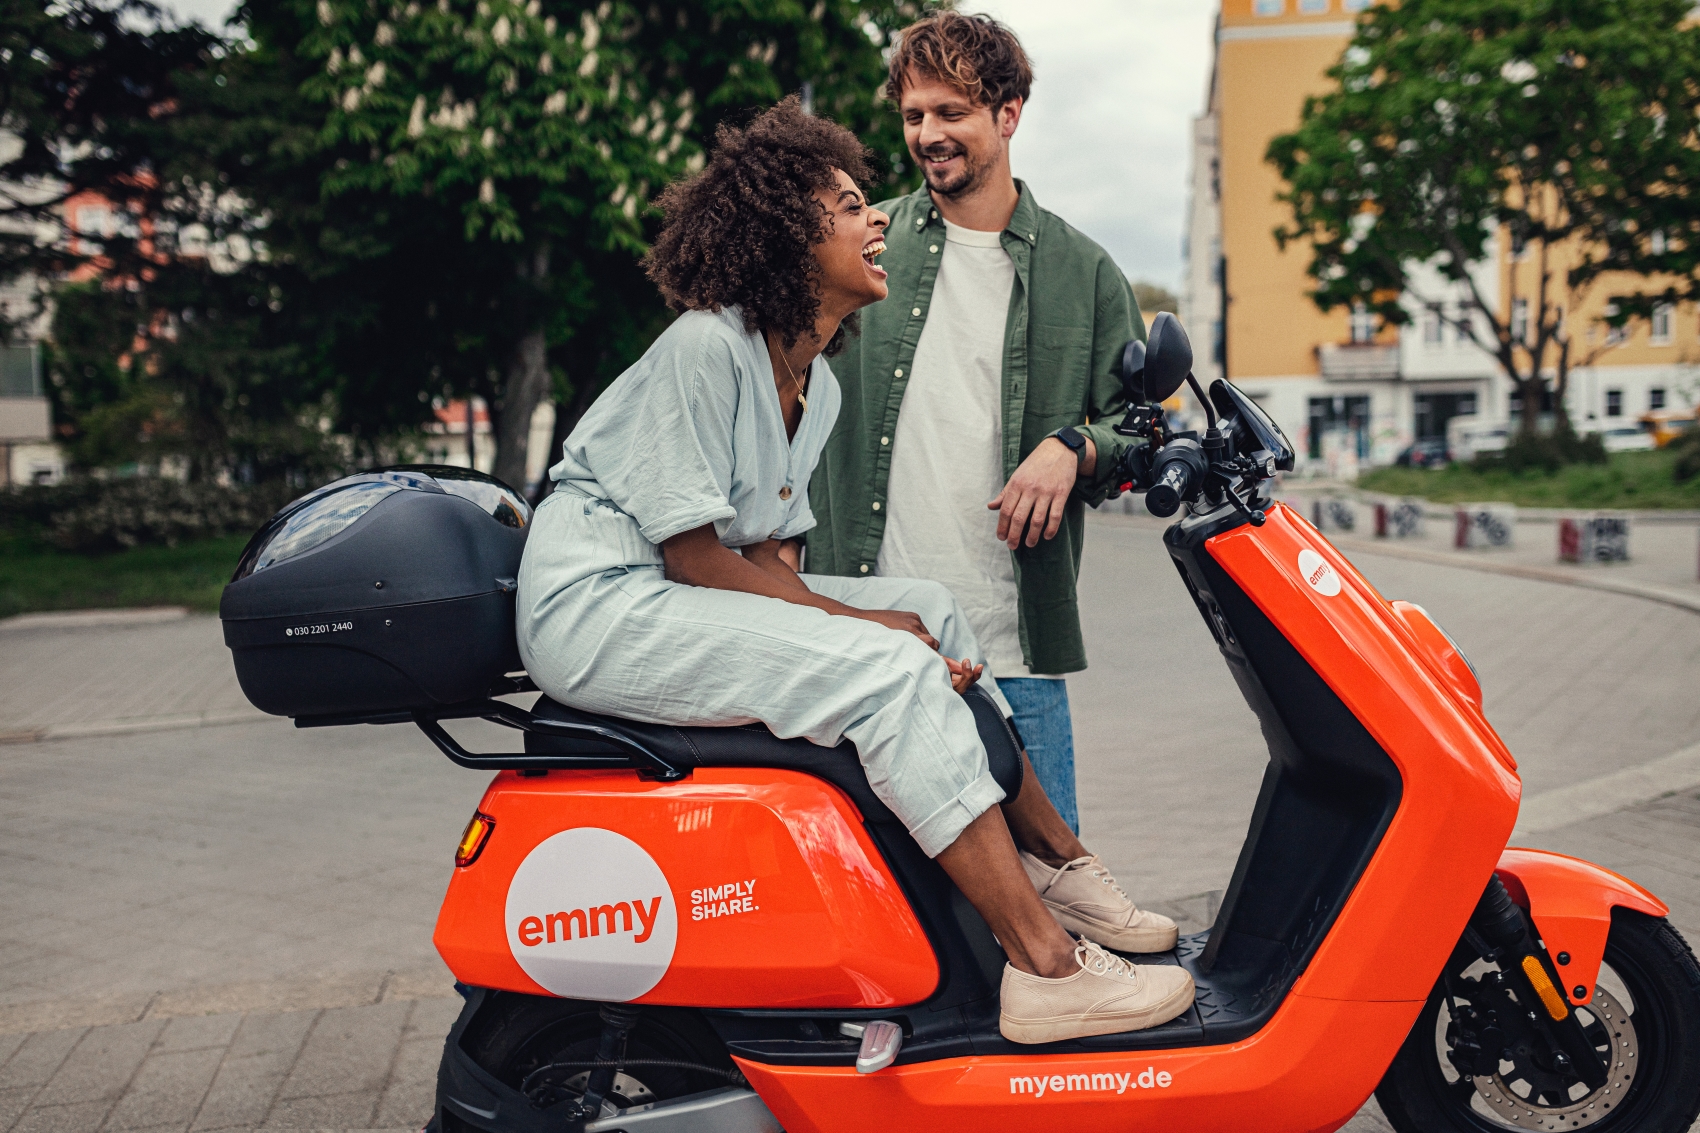 emmy customer card of a caucasian male standing next to an African American female person sitting on an emmy moped in the street. 